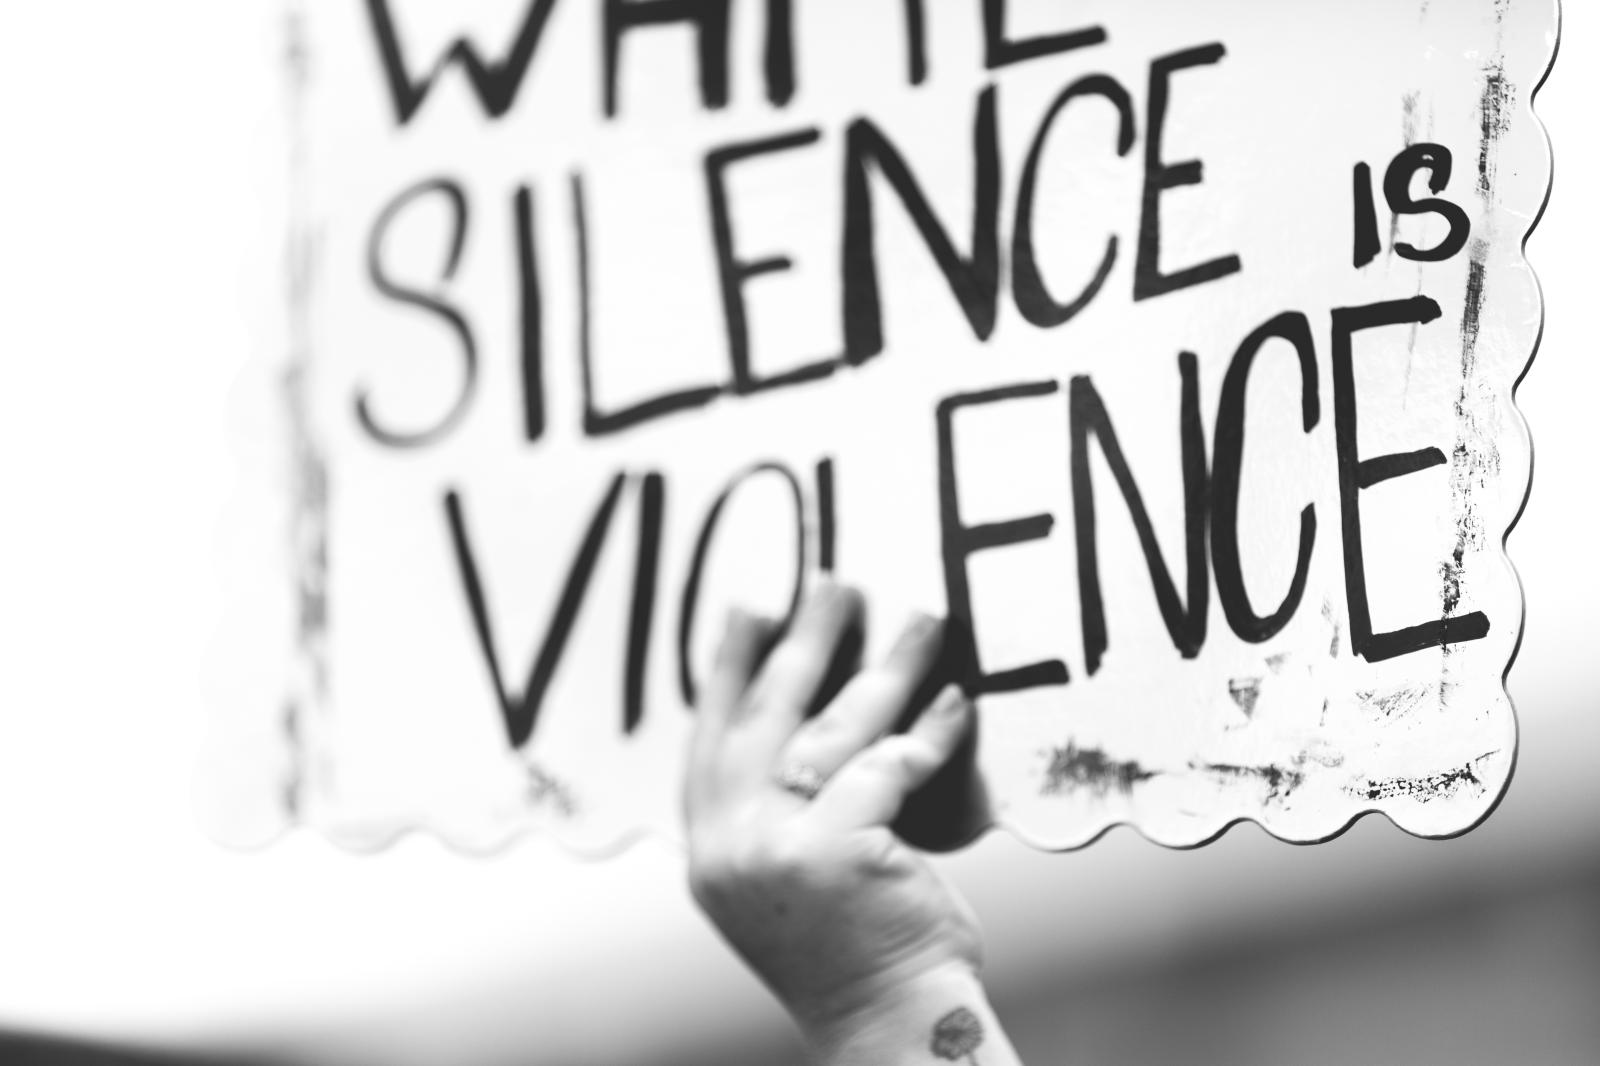 White Silence is Violence | Buy this image